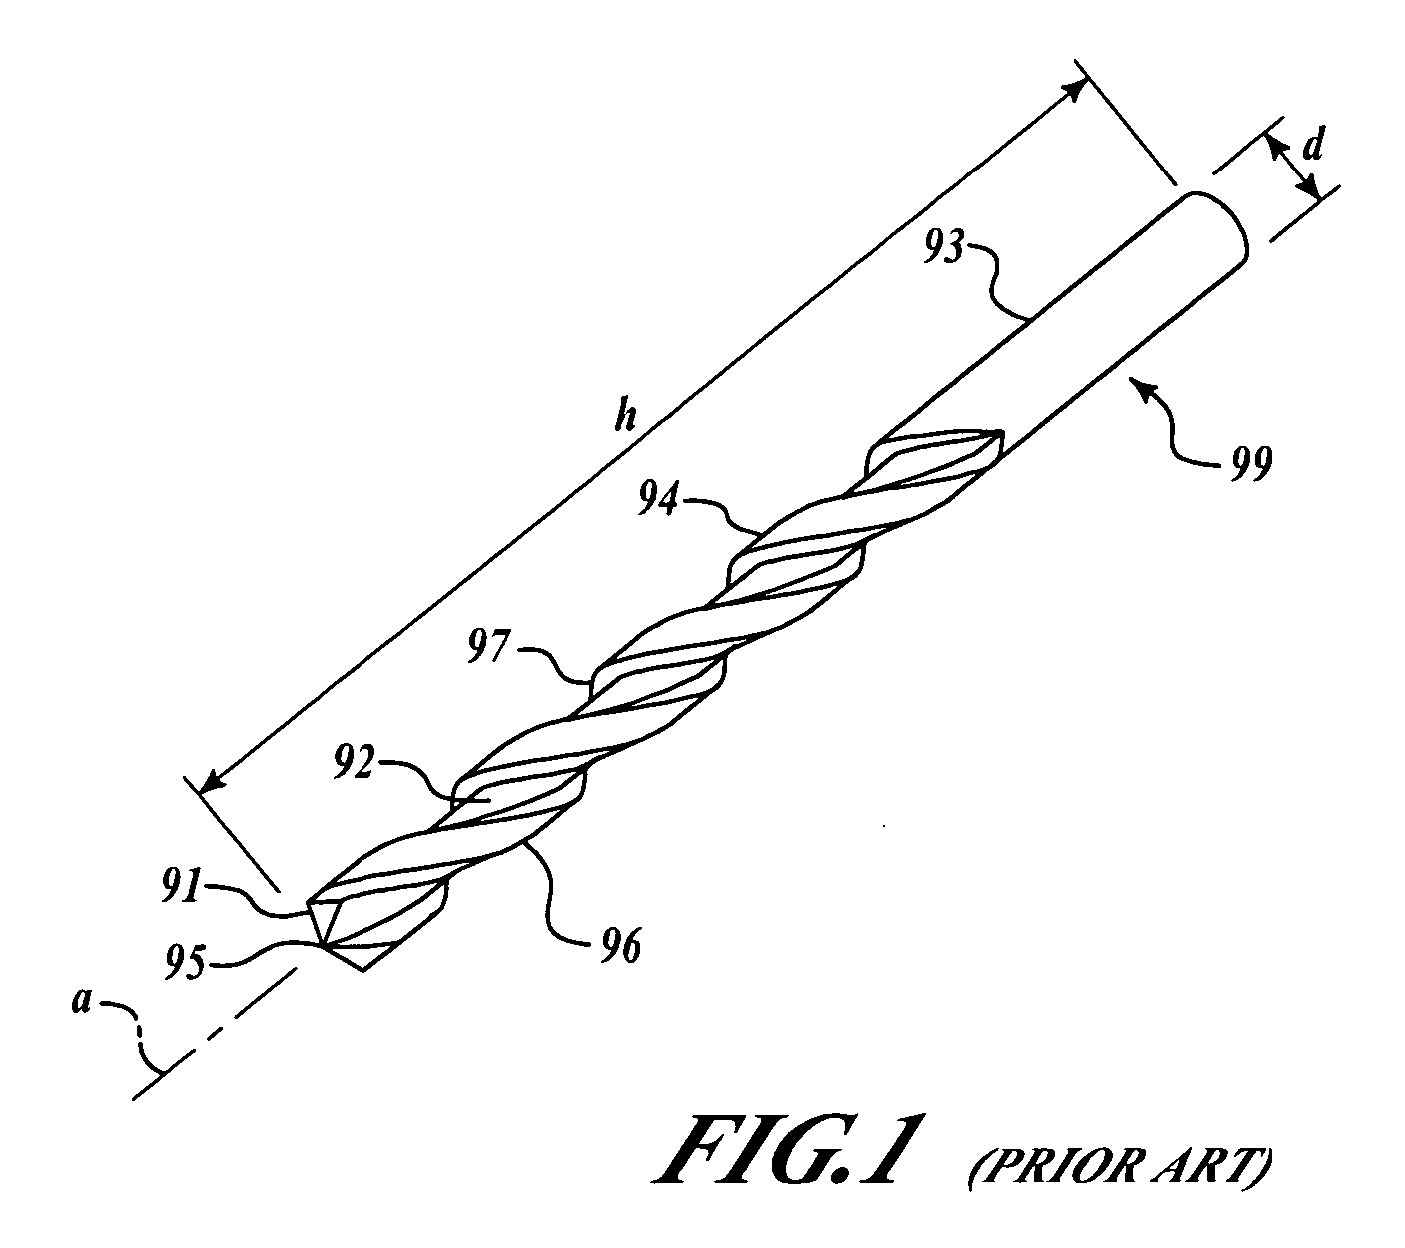 Brazed joint torque test apparatus and methods